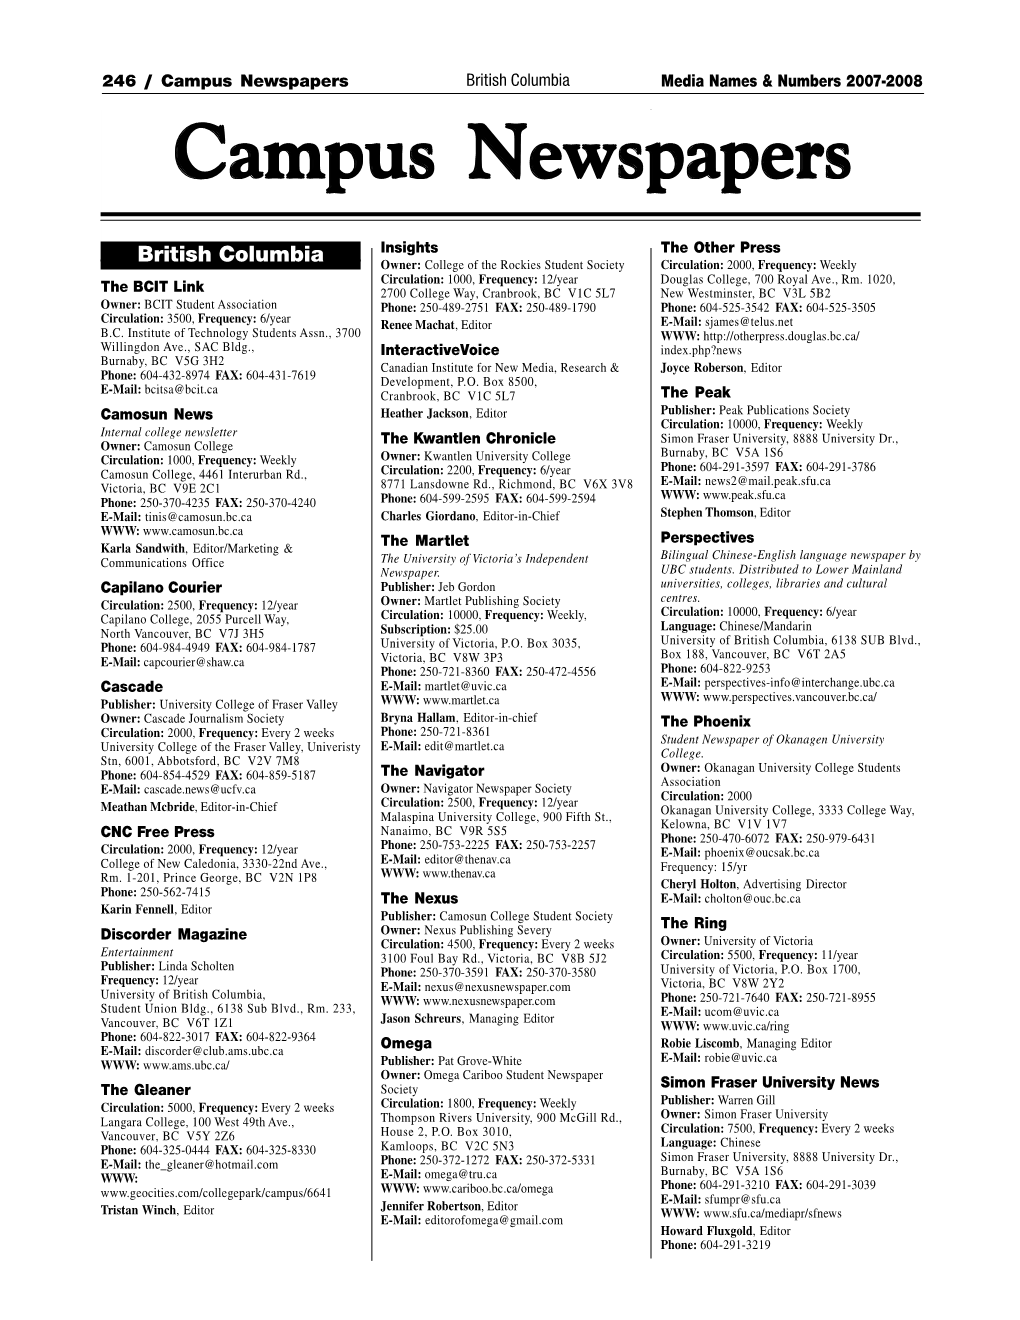 Campus Papers